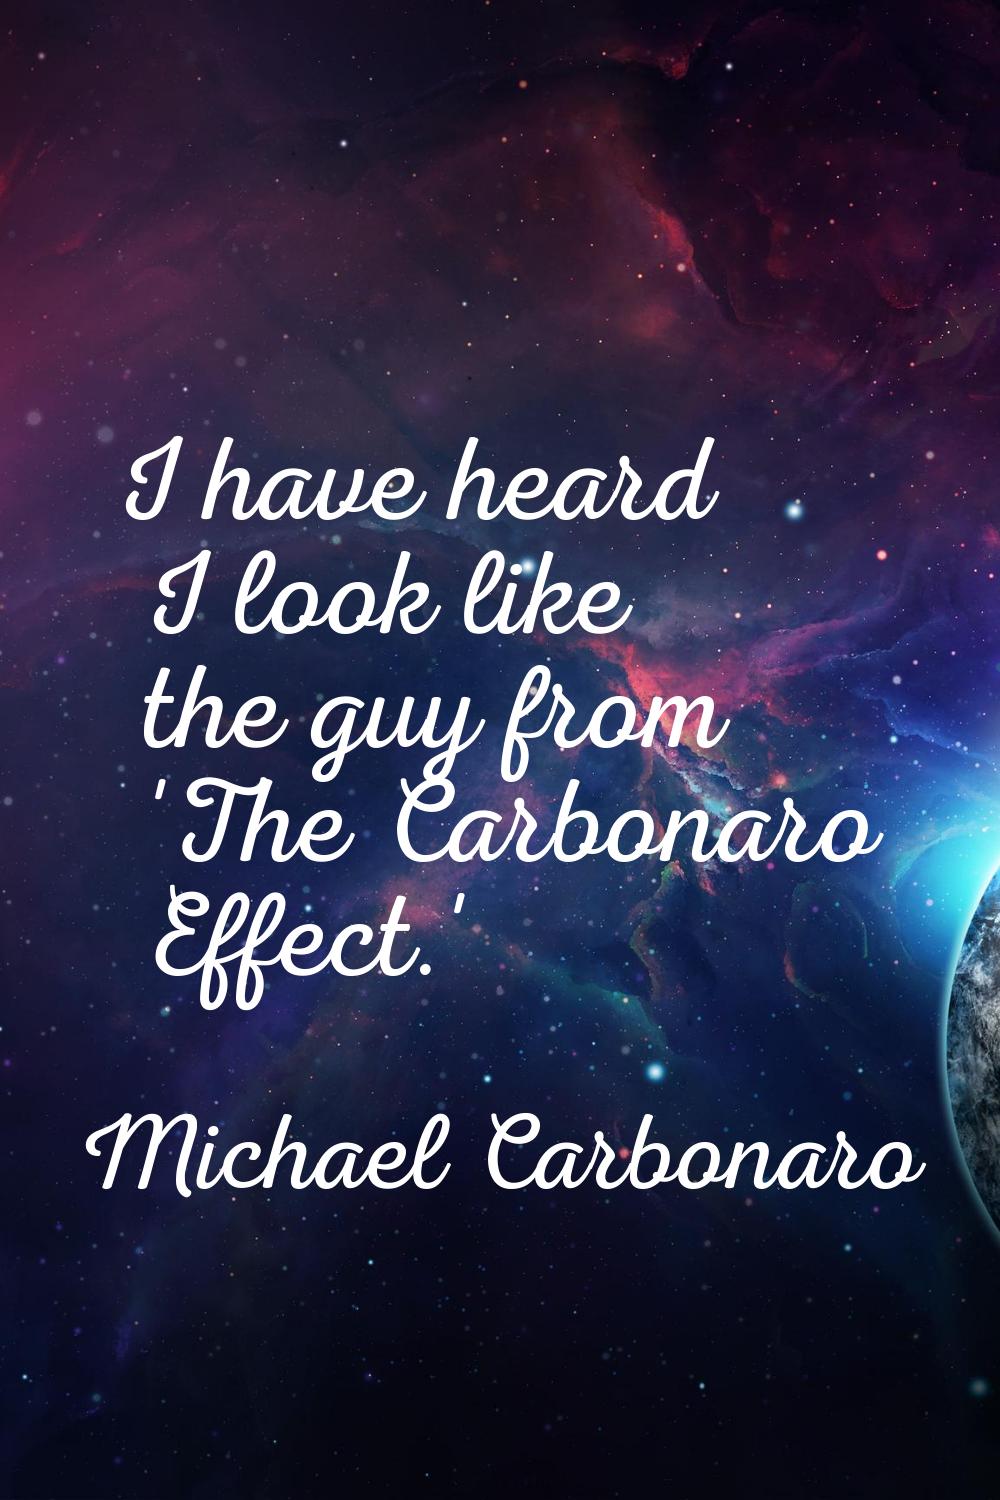 I have heard I look like the guy from 'The Carbonaro Effect.'